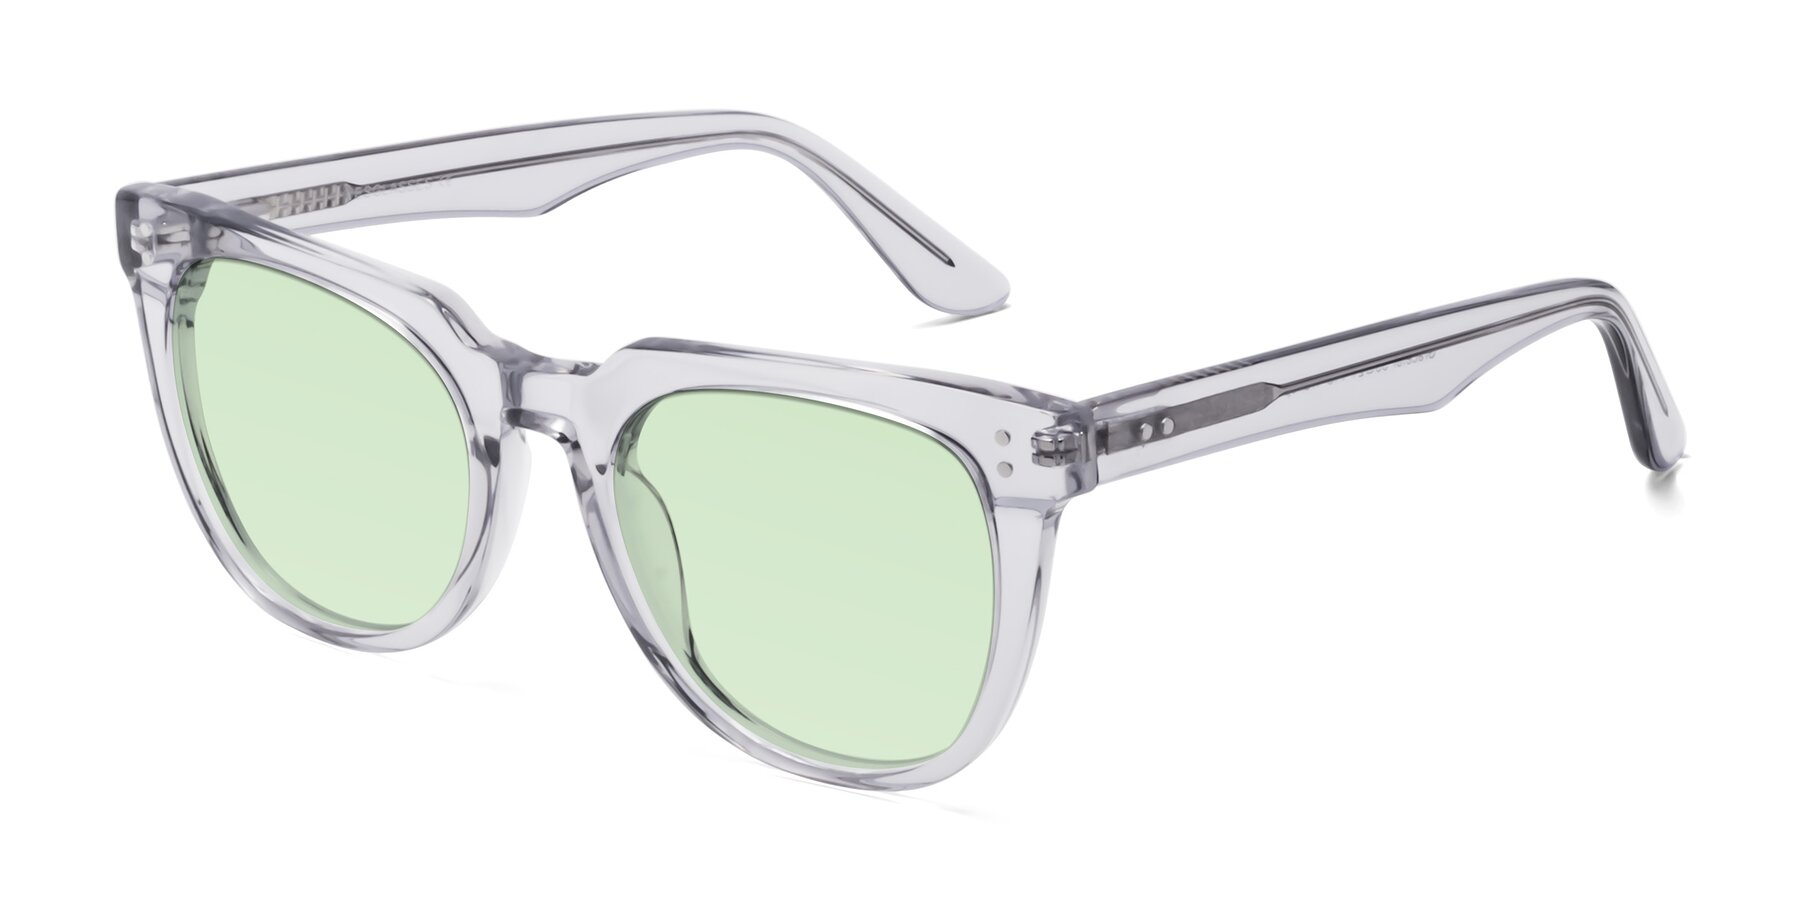 Angle of Graceful in Transprent Gray with Light Green Tinted Lenses